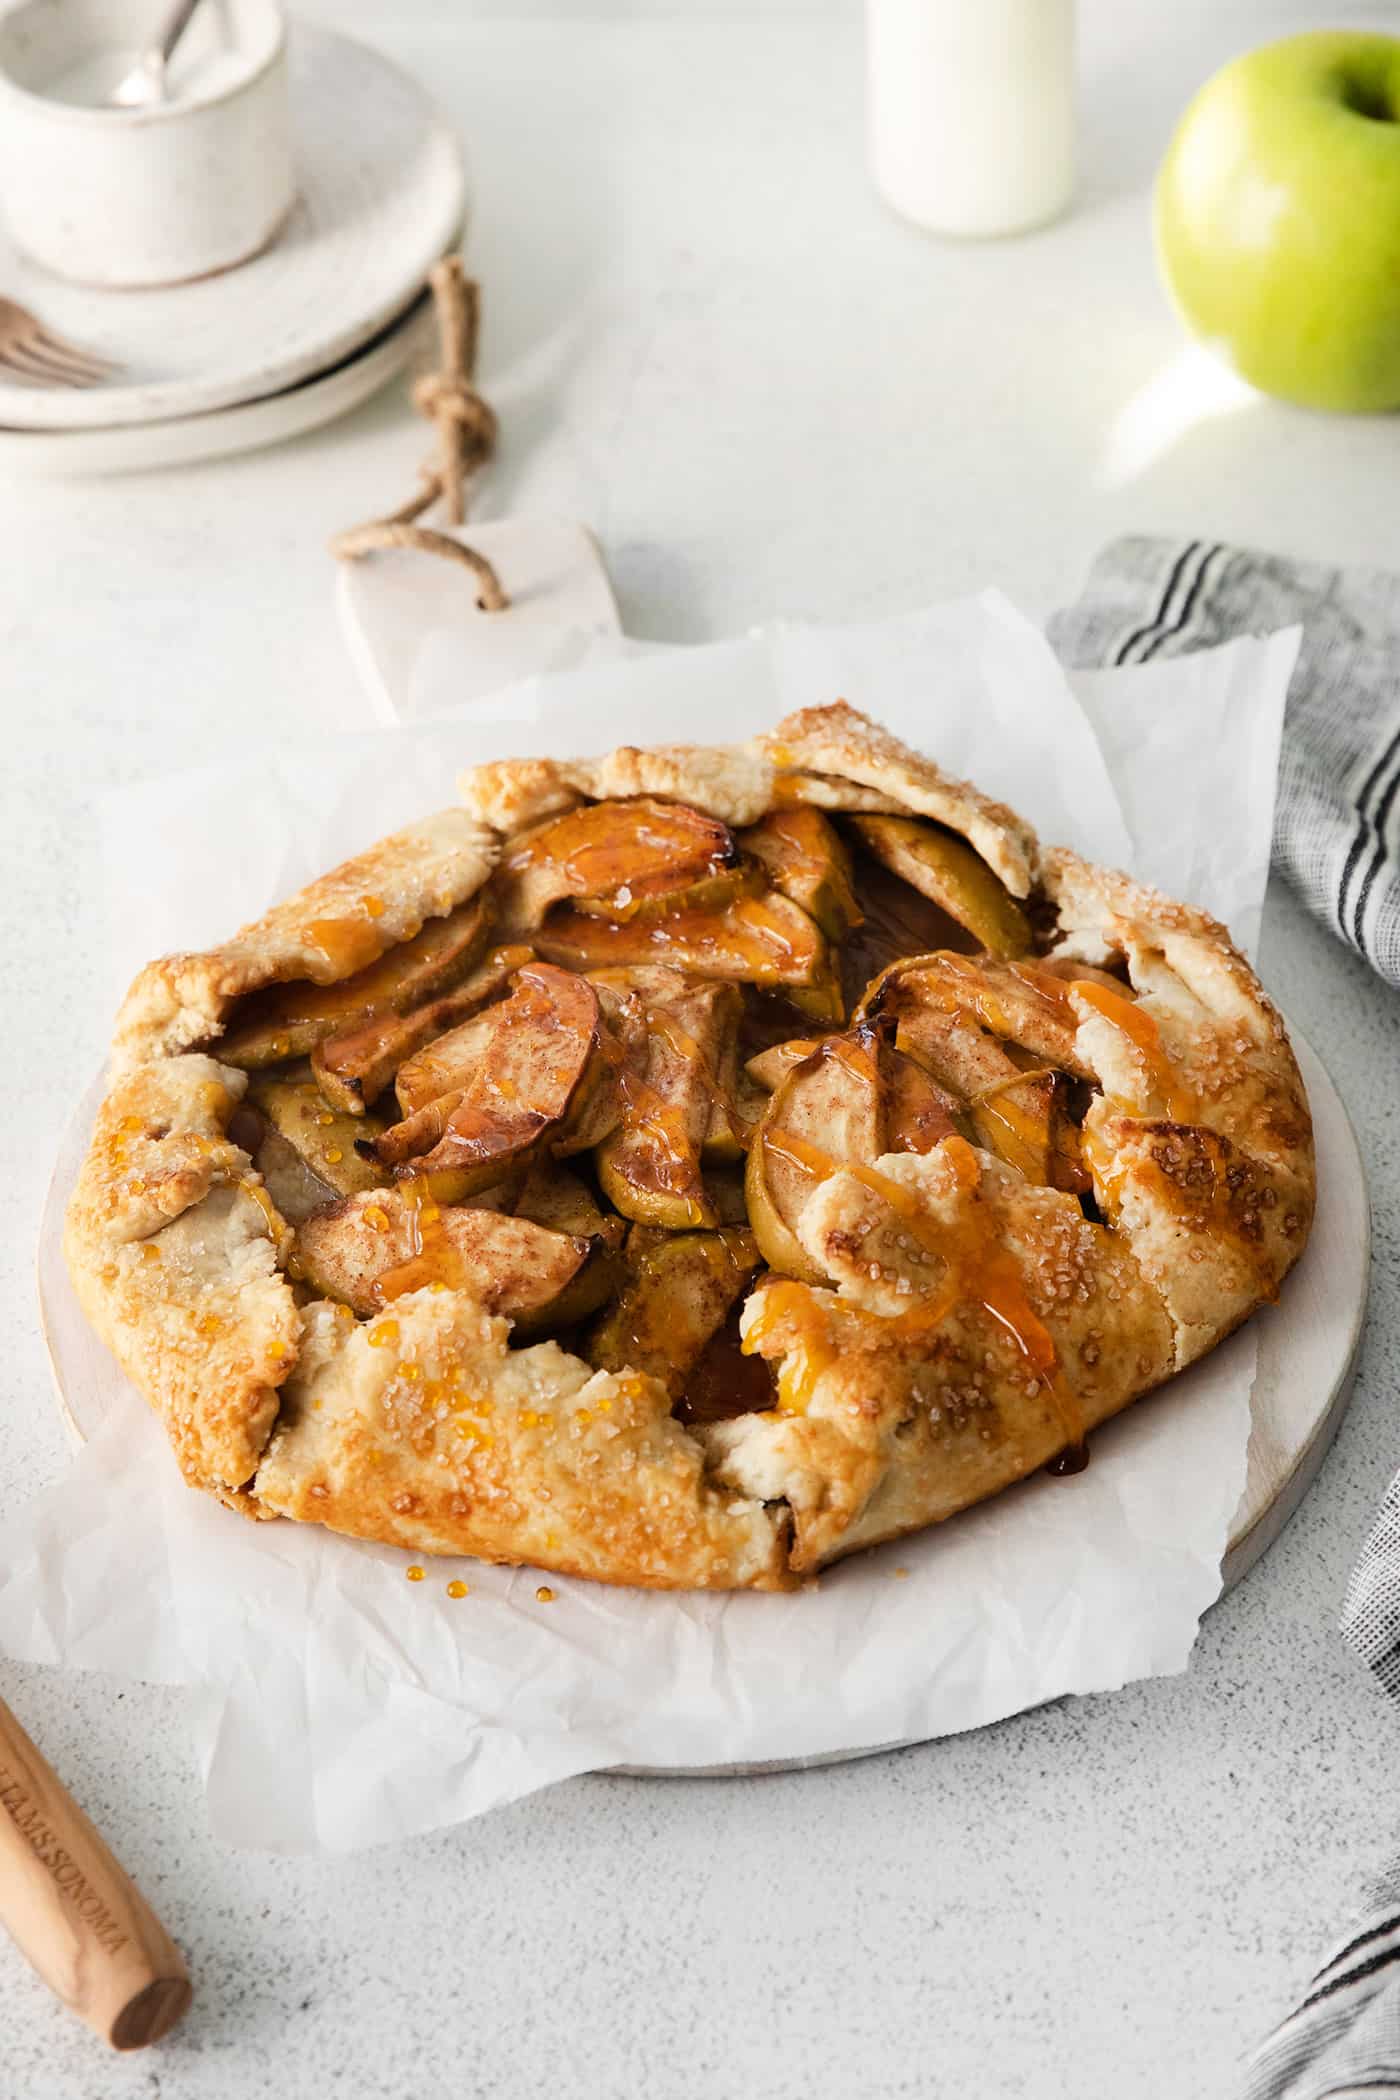 Apple galette on a serving tray